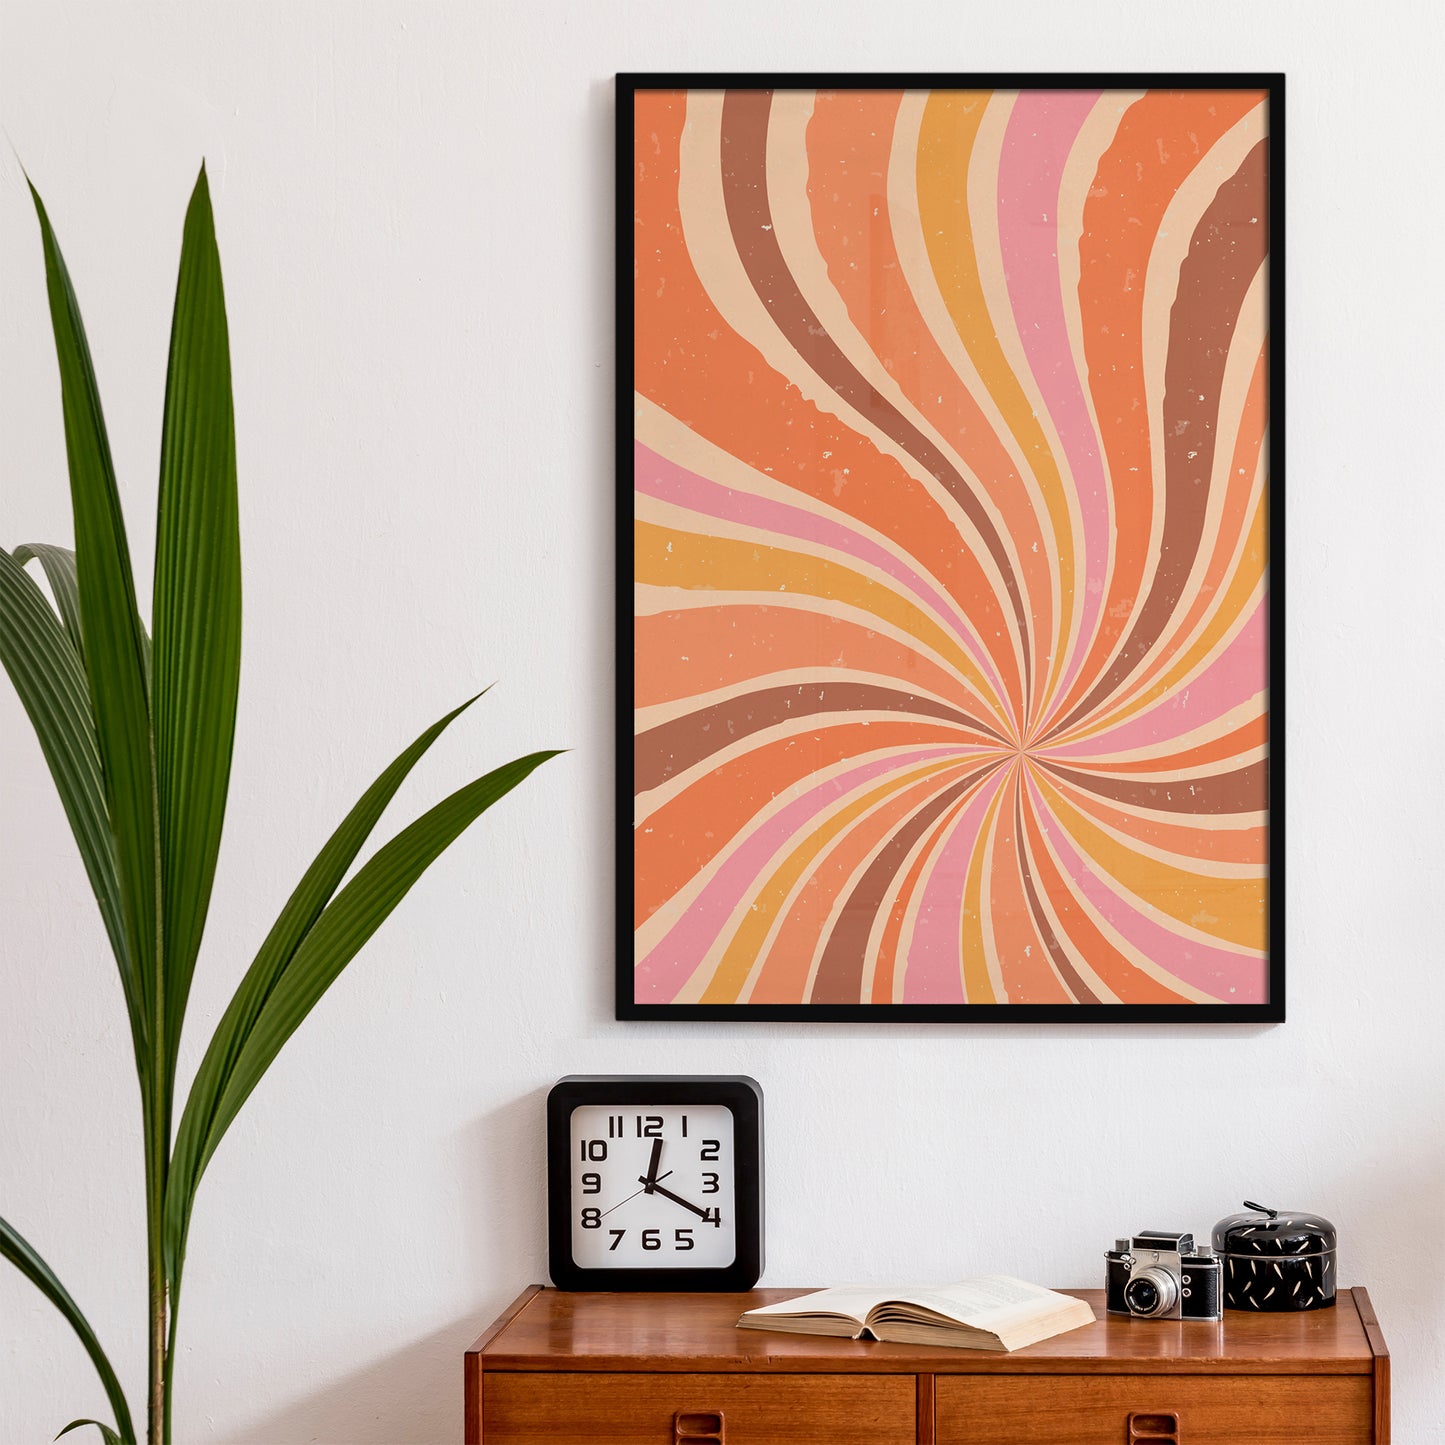 70s inspired Retro Abstract Sunset